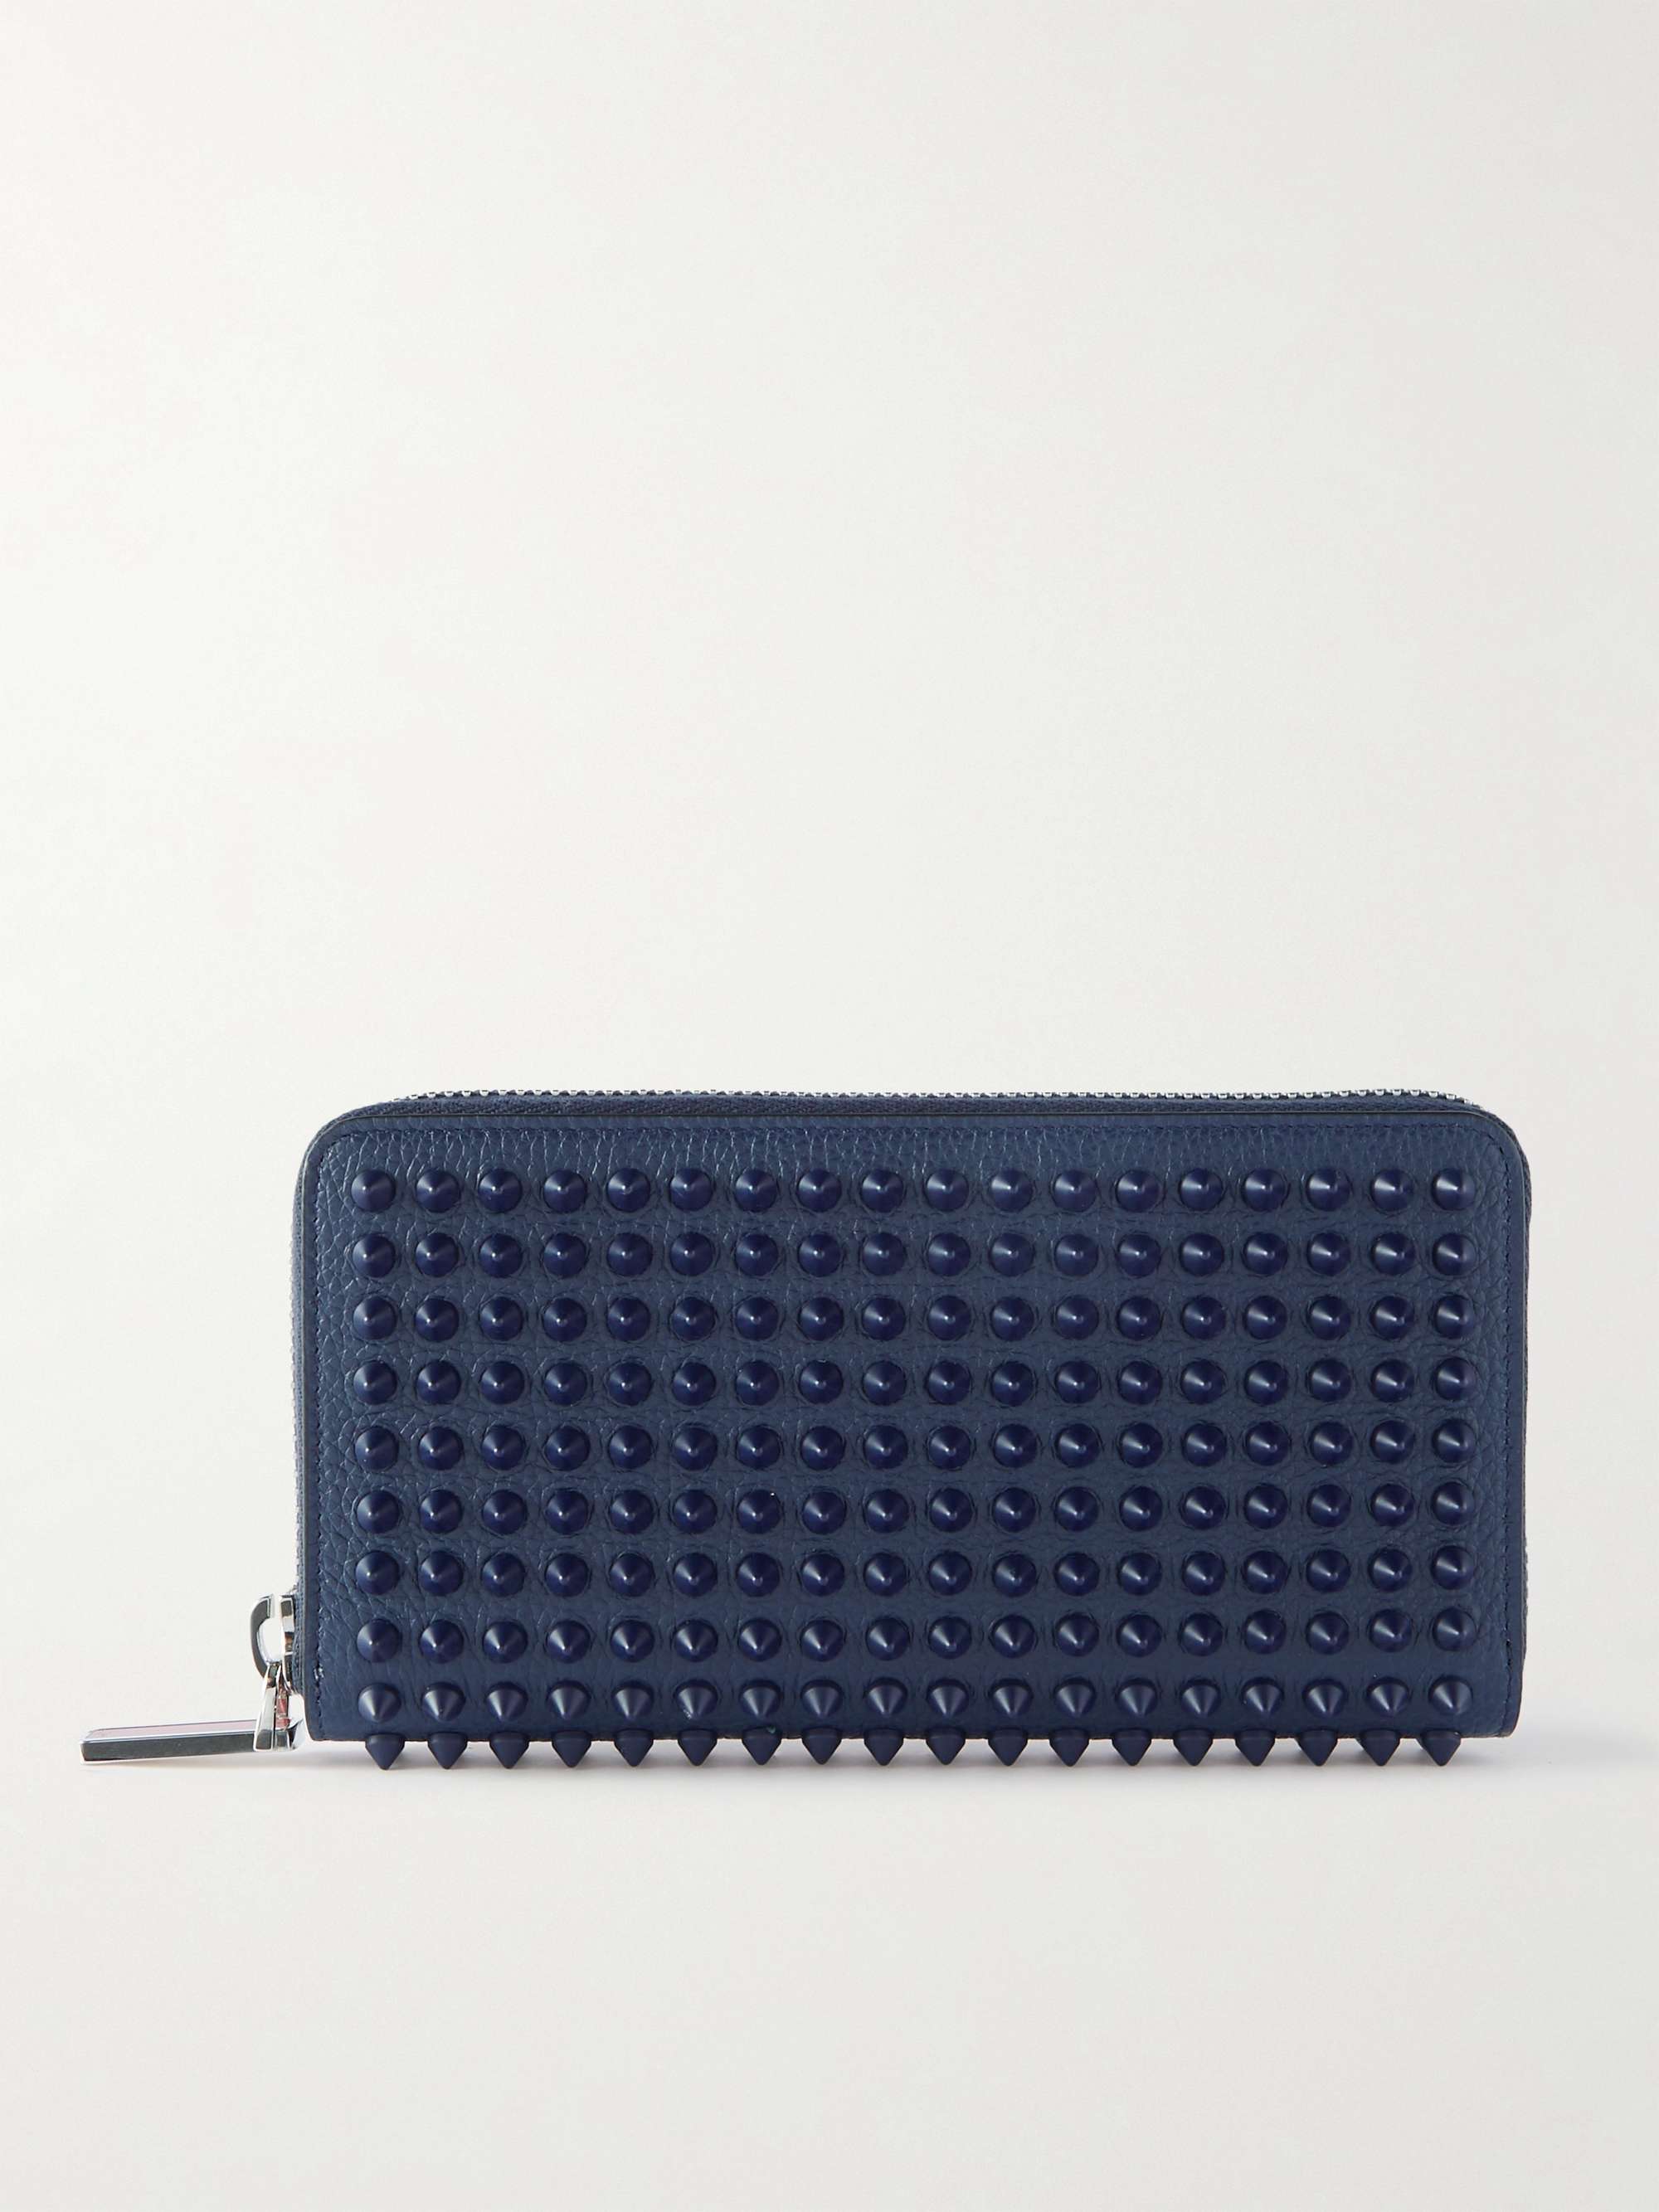 CHRISTIAN LOUBOUTIN Spiked Full-Grain Leather Zip-Around Wallet